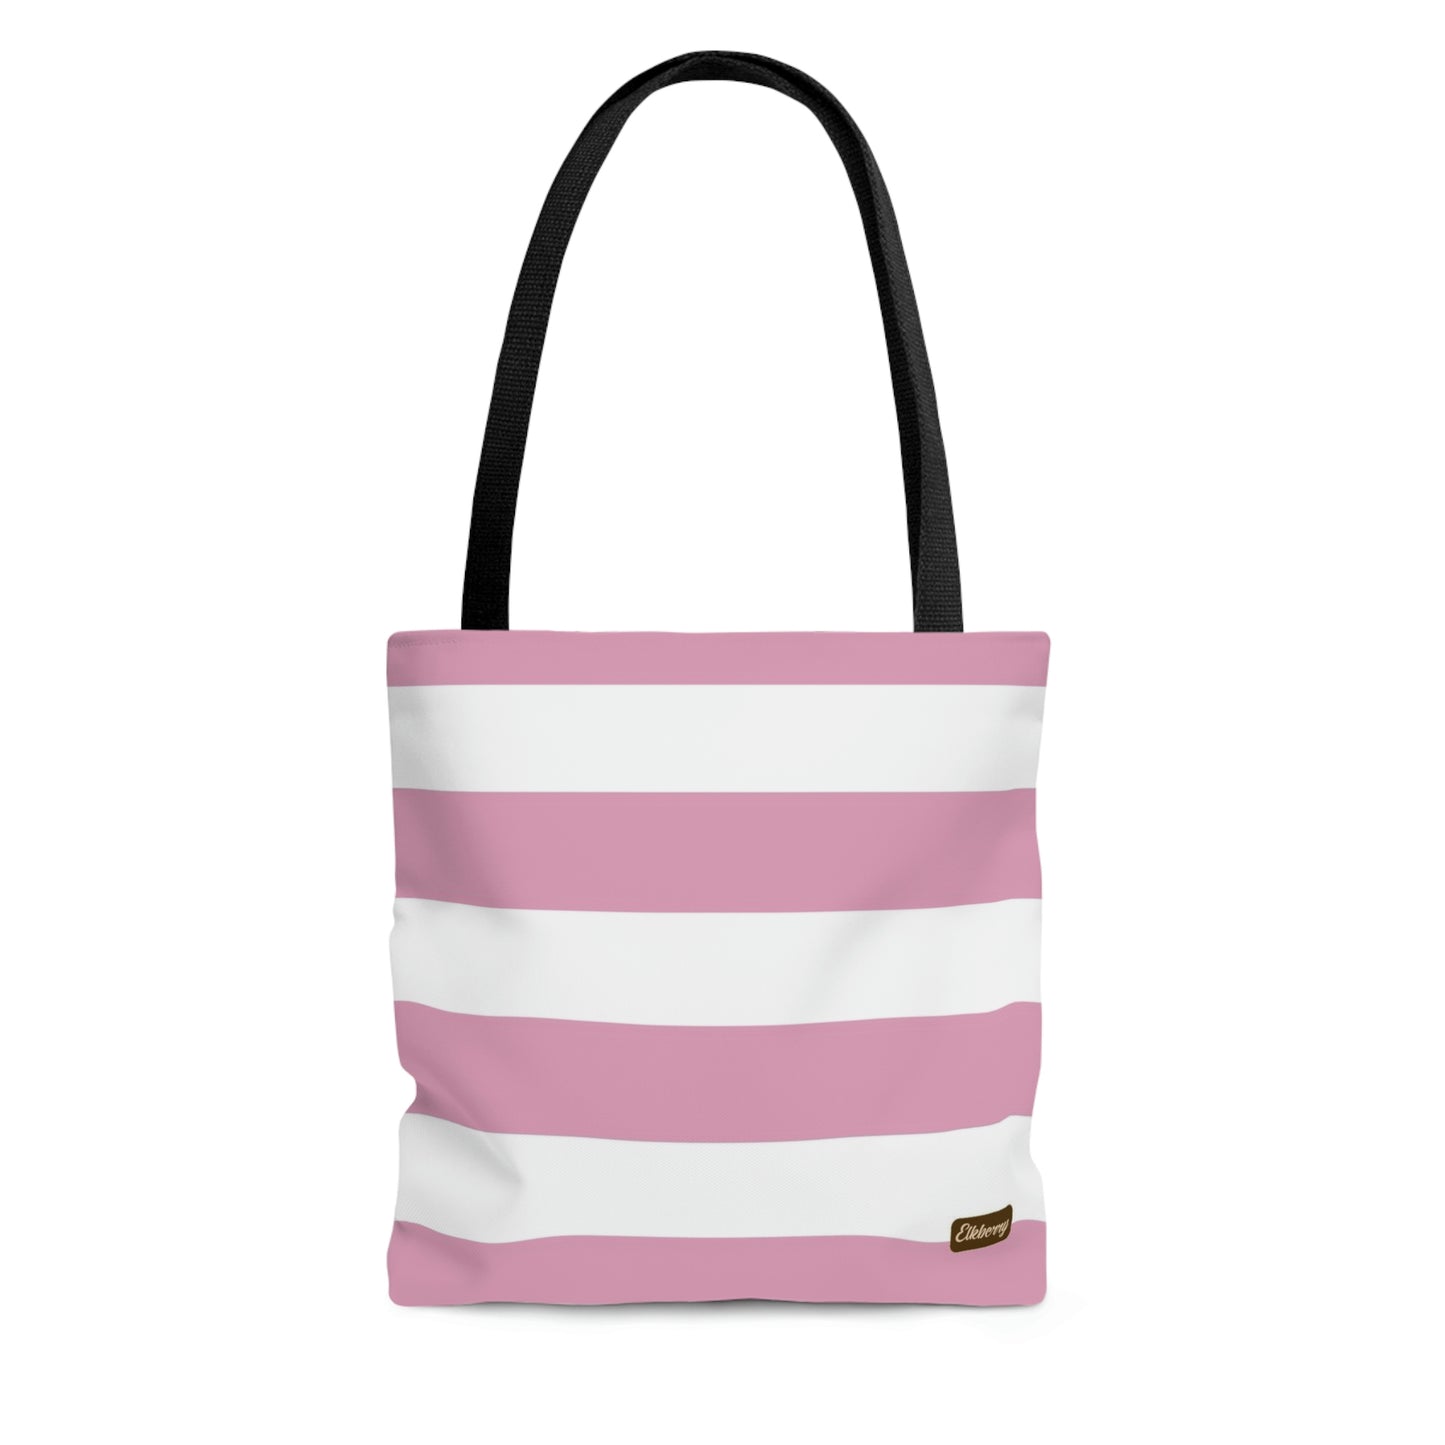 Lightweight Tote Bag - Baby Pink/White Stripes